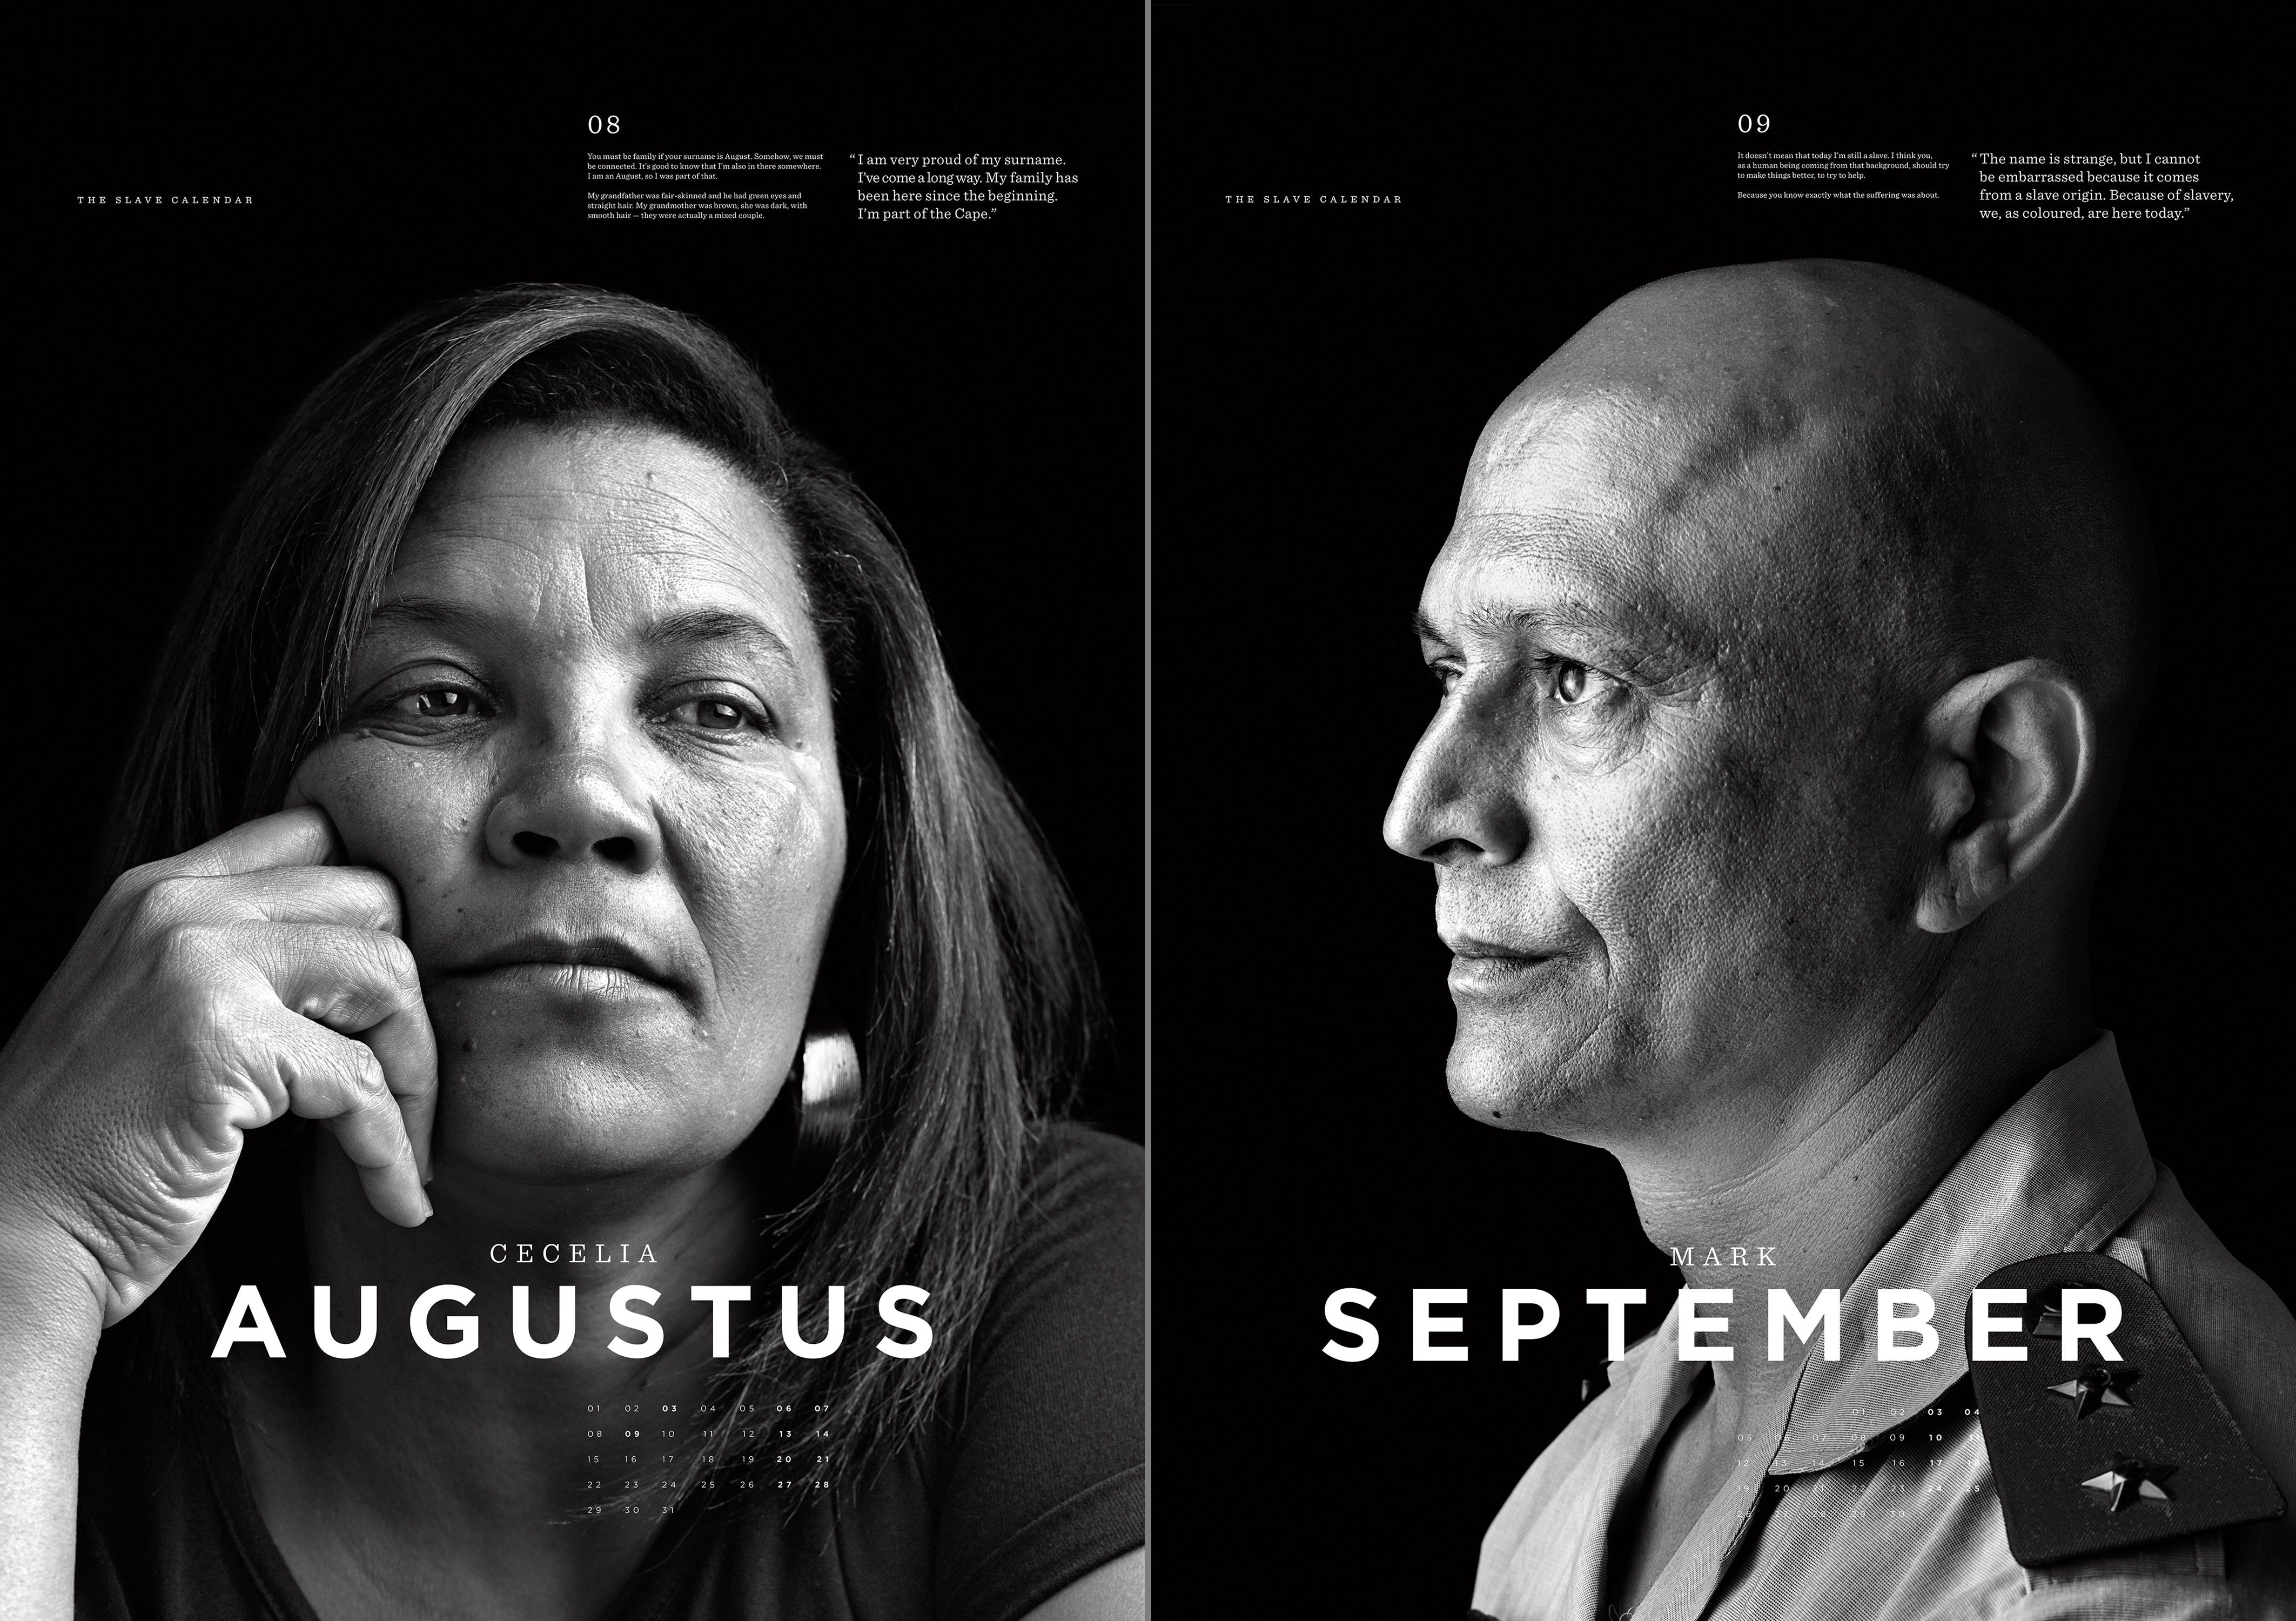 Ogilvy lands ads of the year